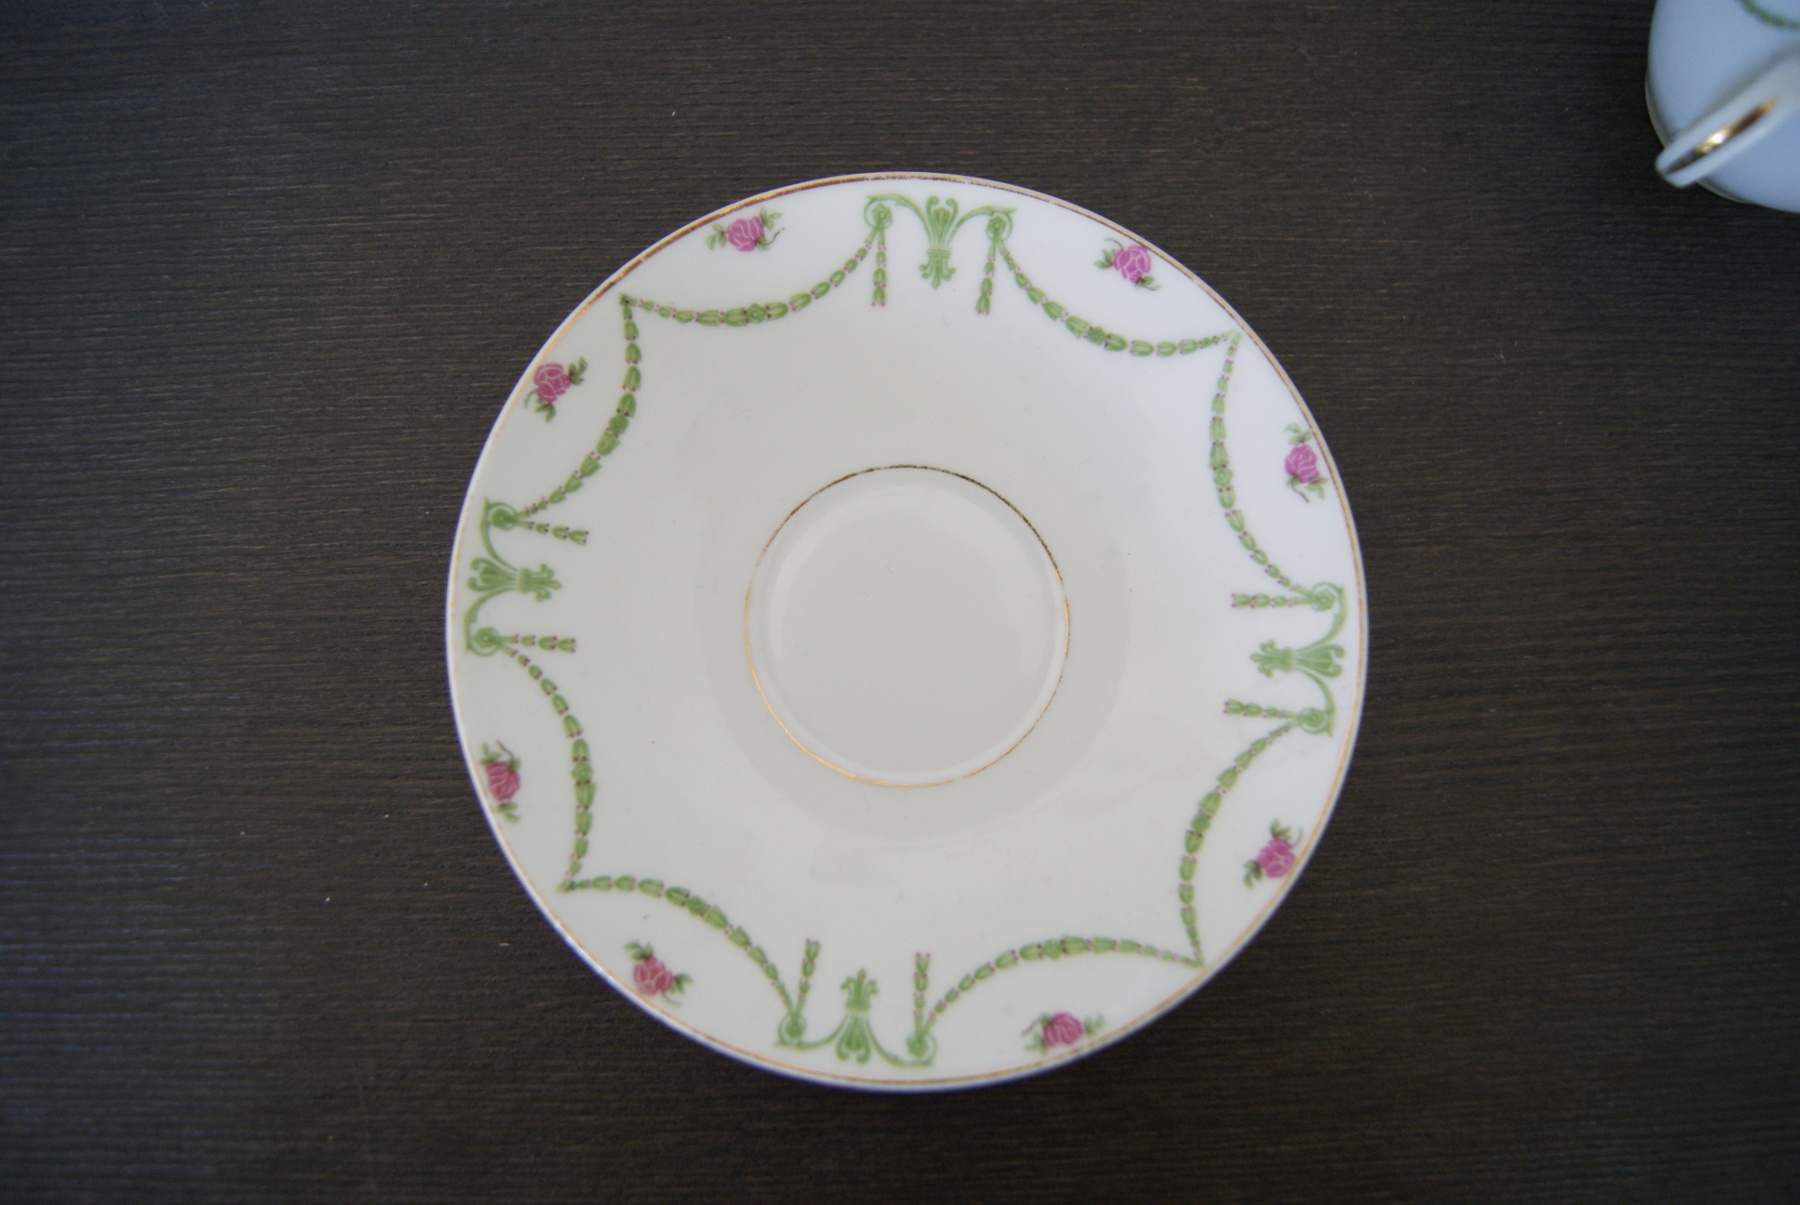 Porsgrund cup with saucer flowers with green garlands